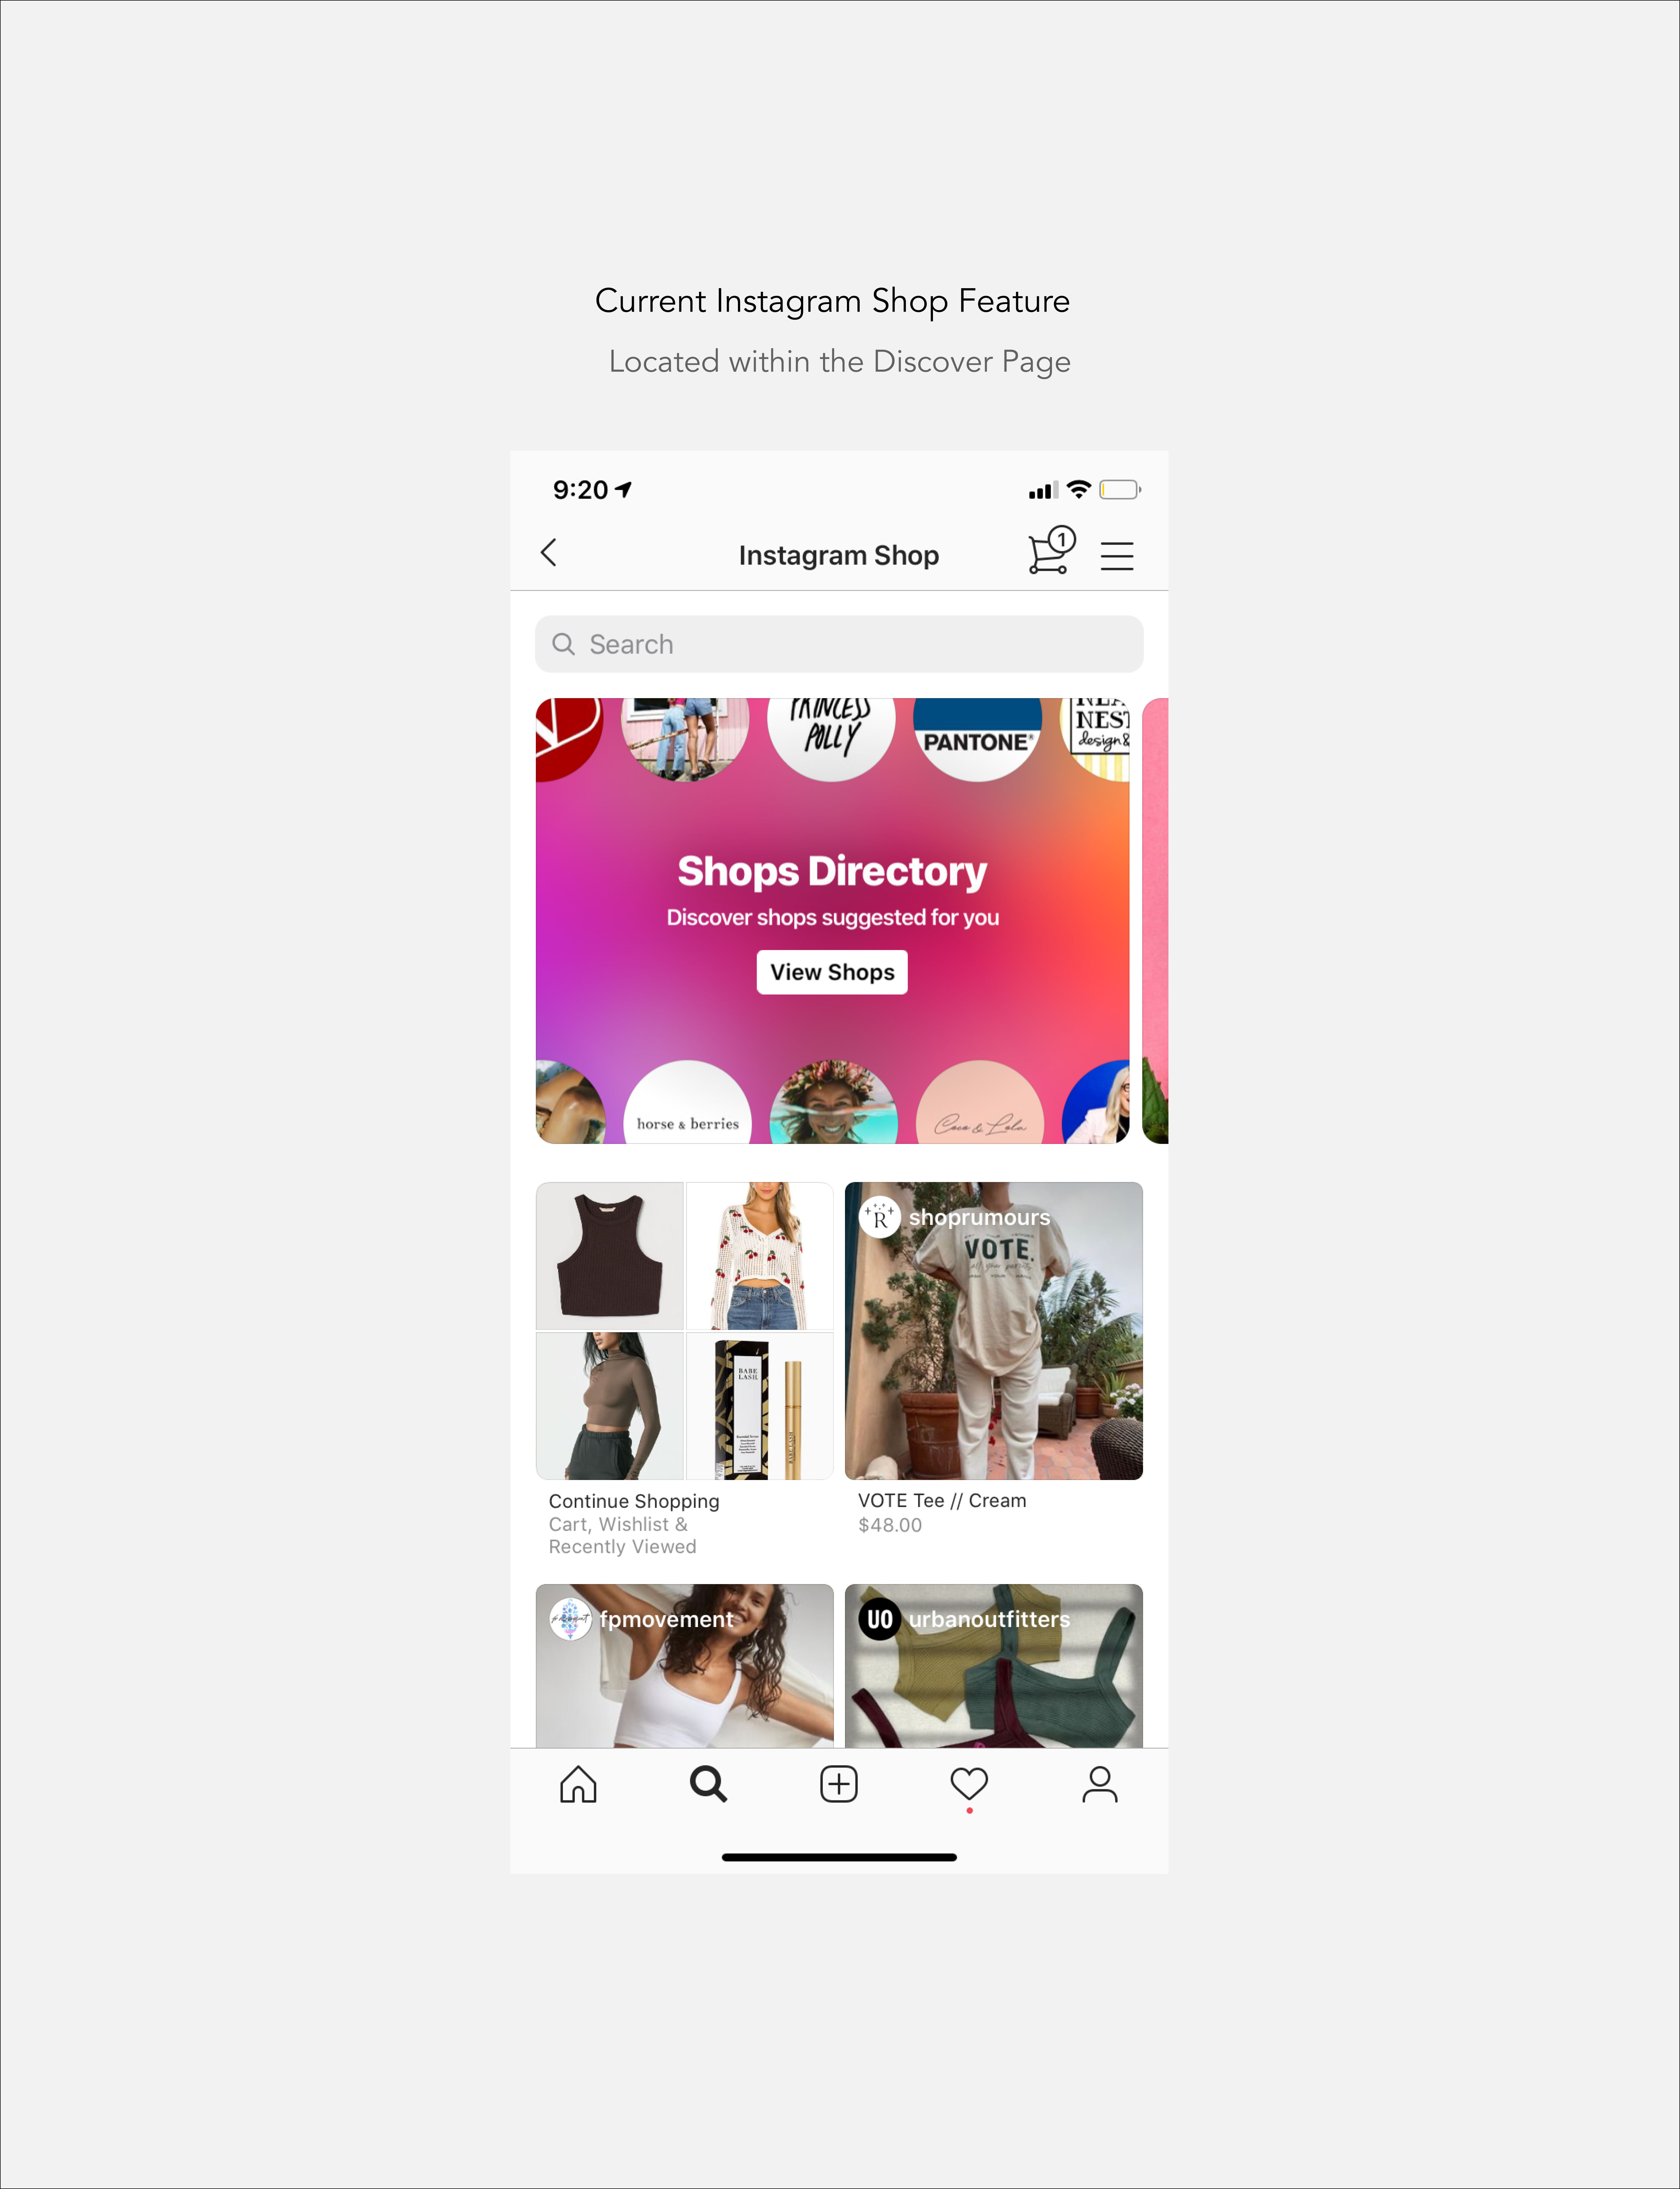 Instagram Shop Feature as of October, 2020